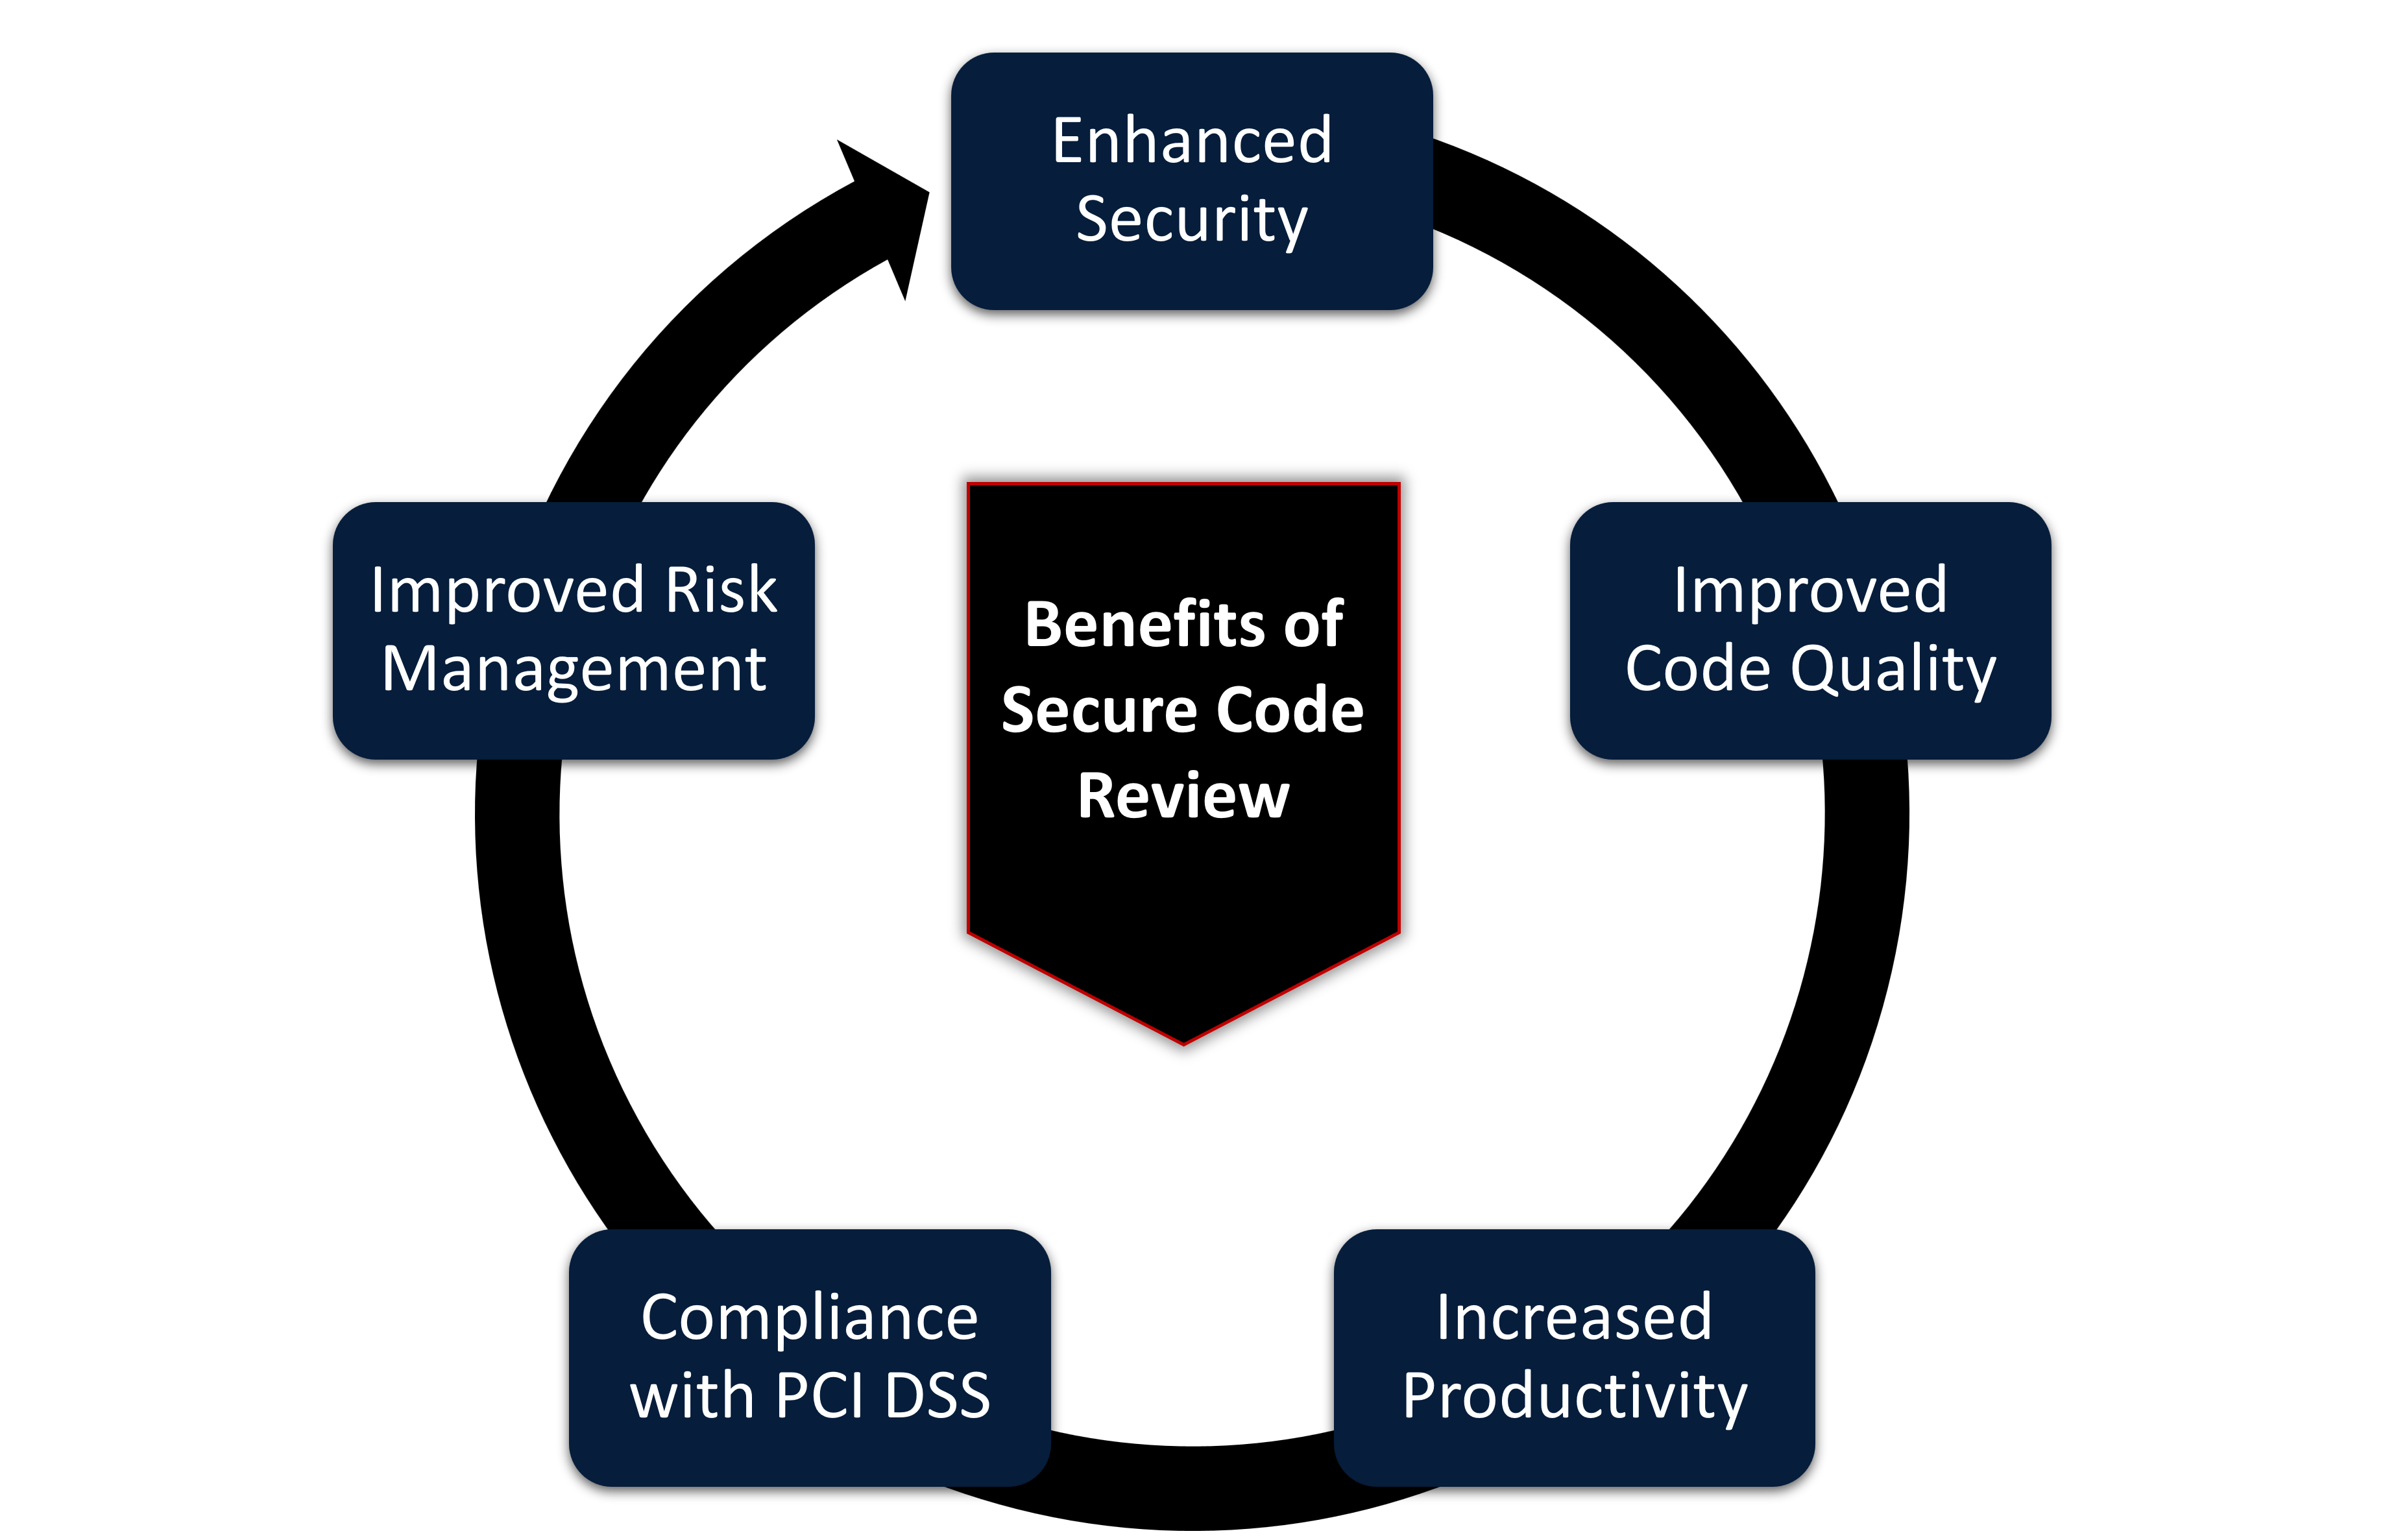 Benefits of Secure Code Review